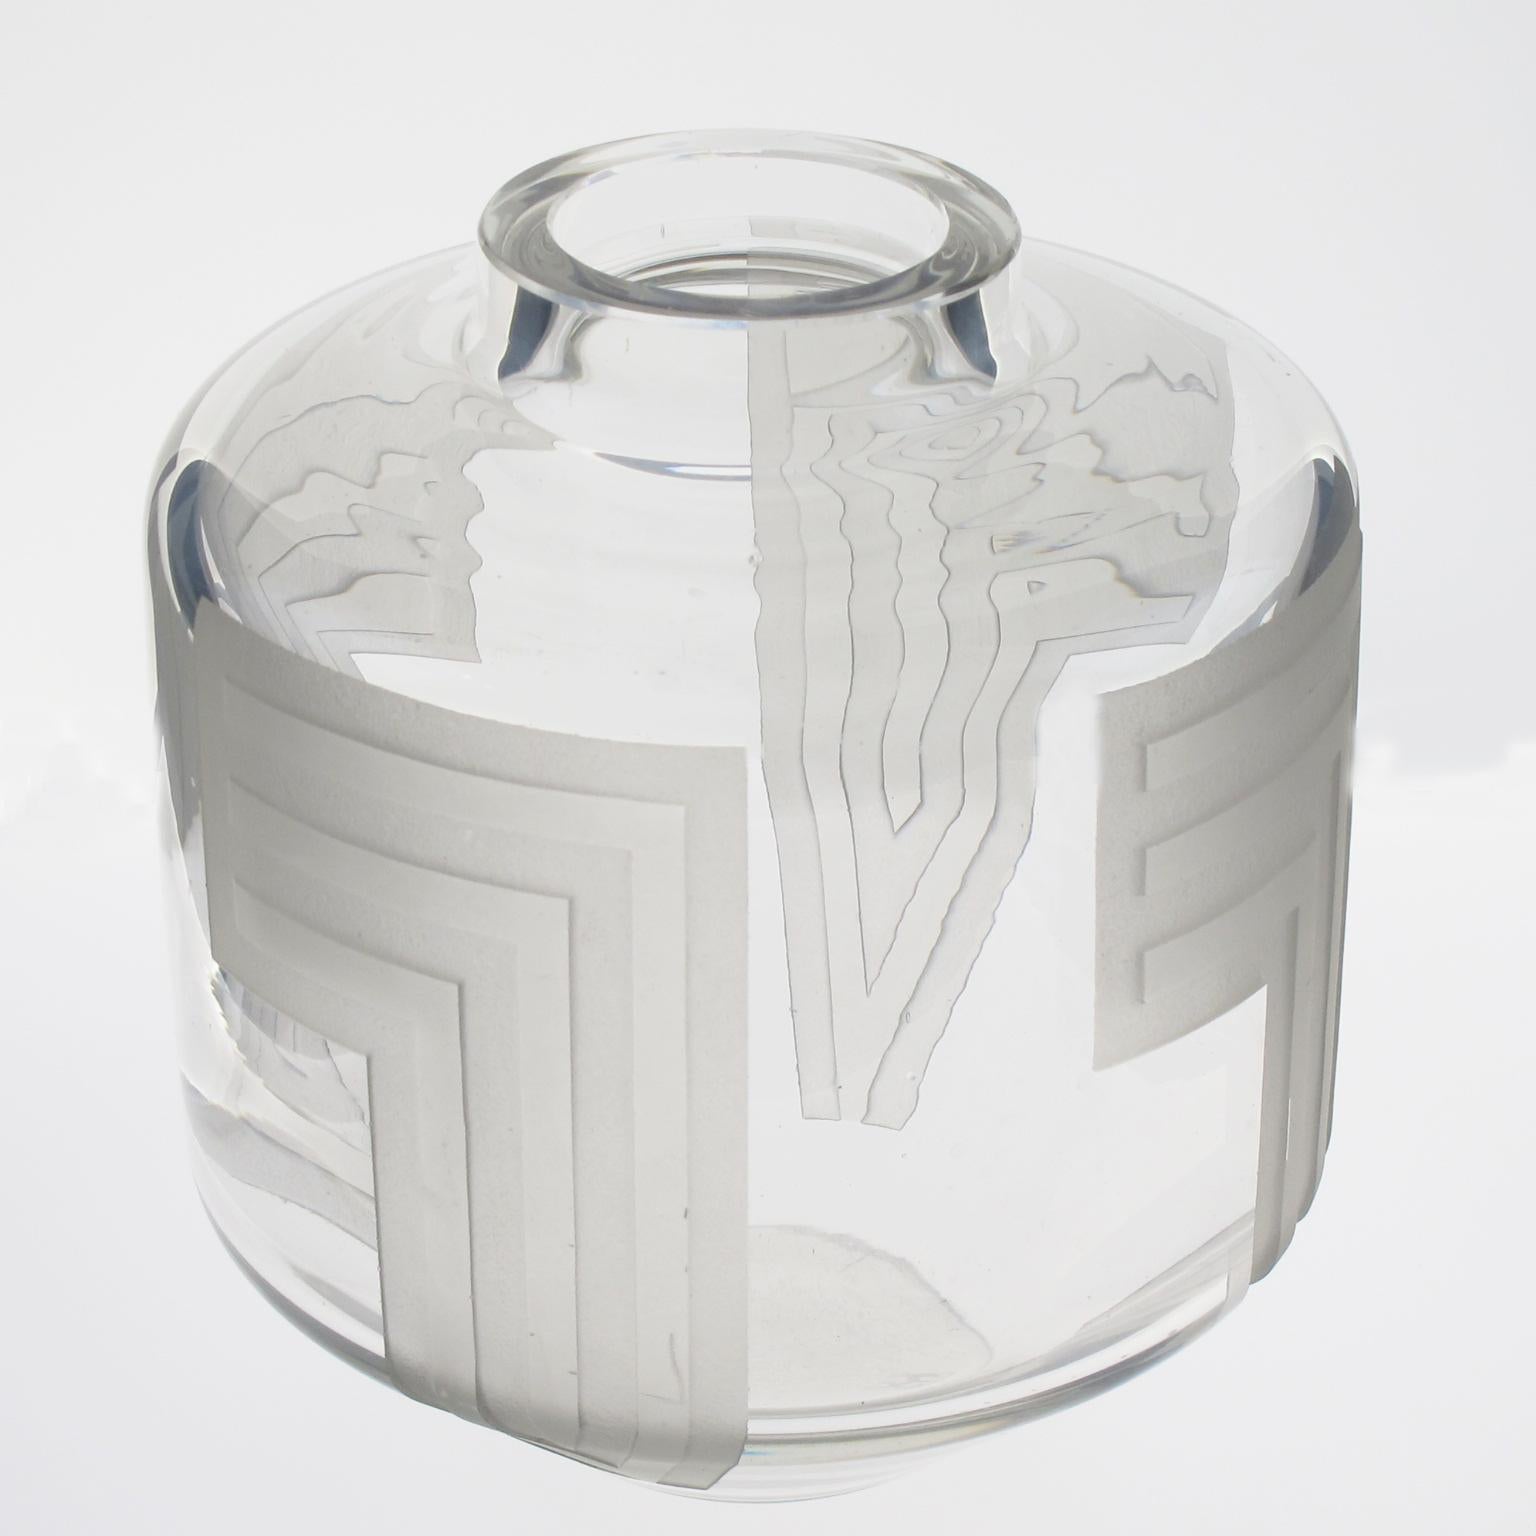 French designer Jean Luce (1895-1964) created this impressive 1930s acid-etched glass vase. The geometric design with repeated decoration is all around the vase. The artist's signature is underside with the usual known monogram. 
The vase is in good